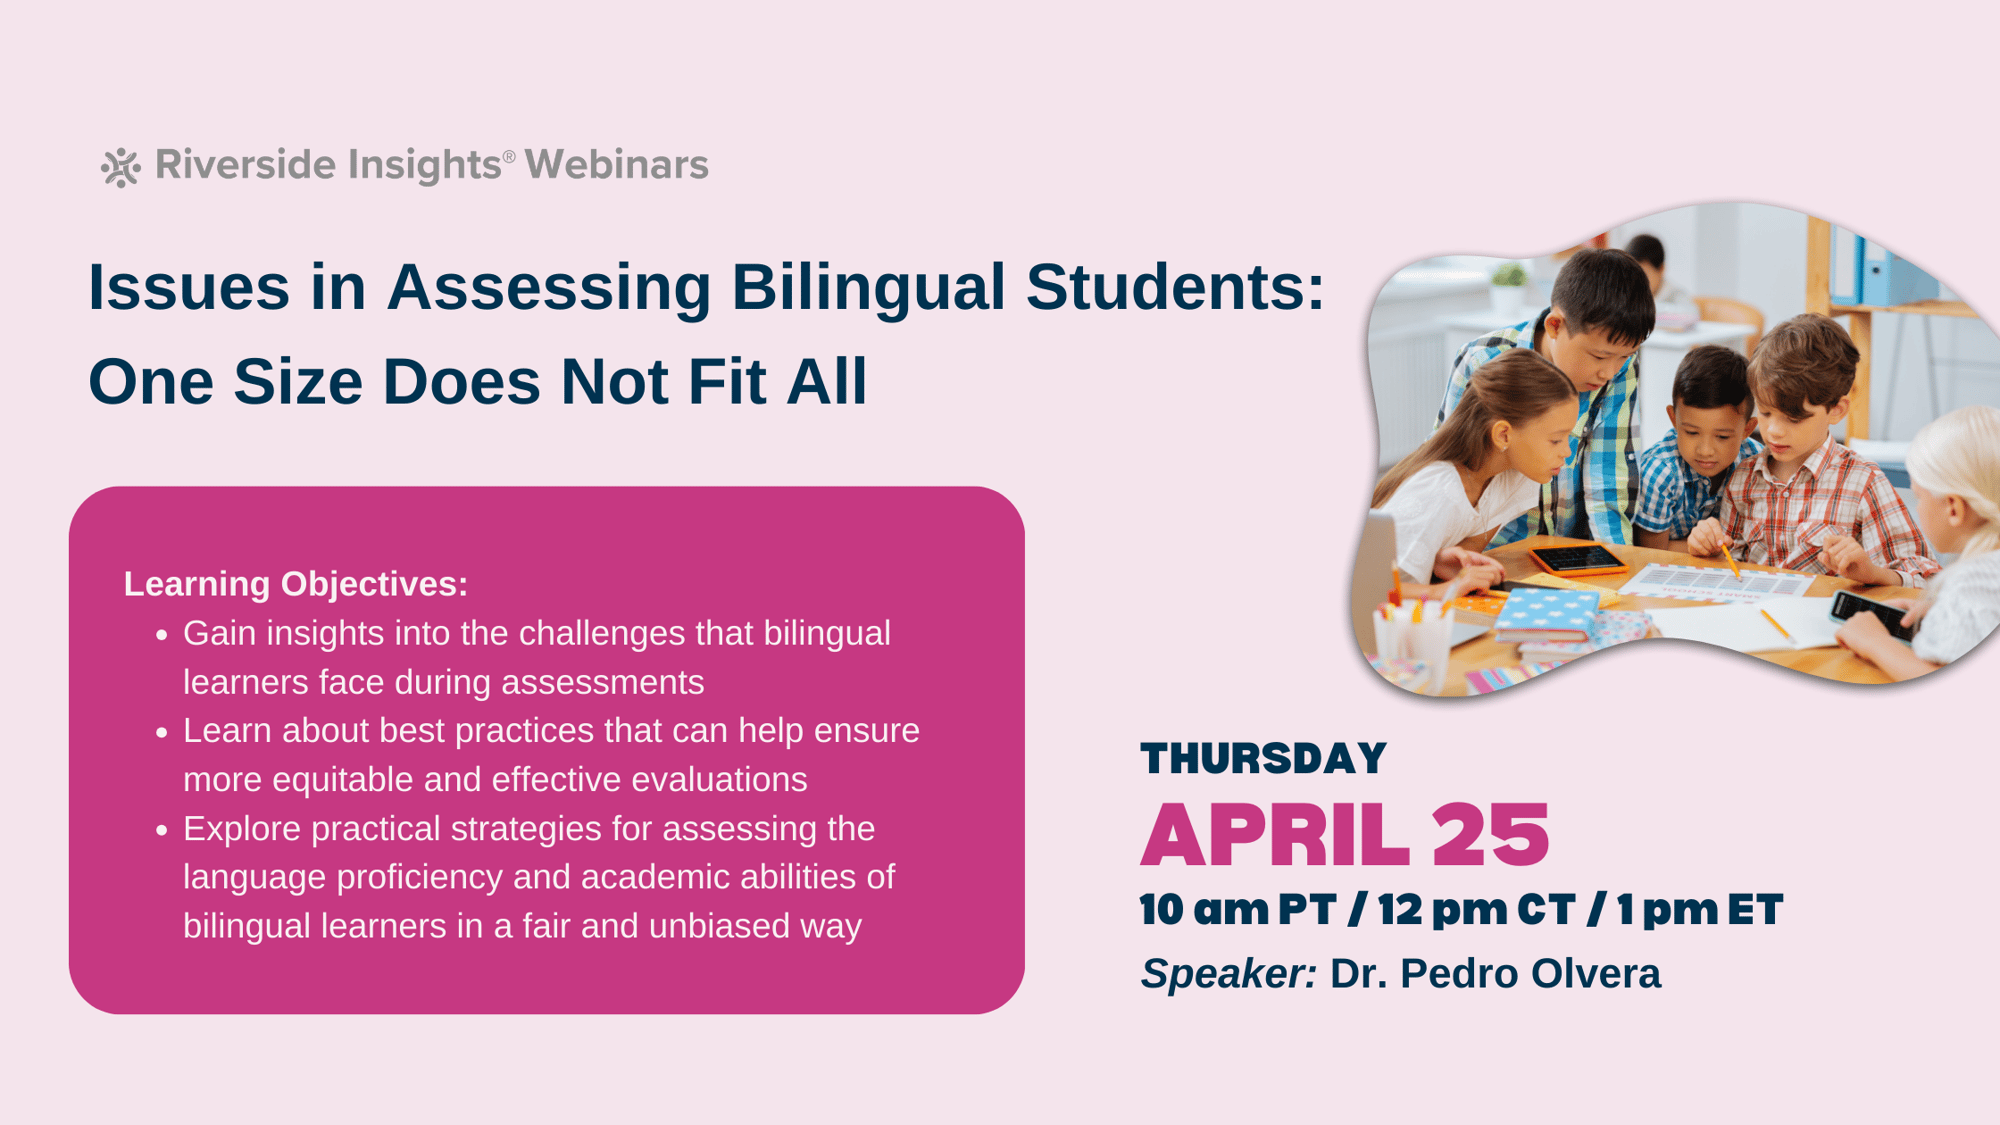 Issues in Assessing Bilingual Students Webinar